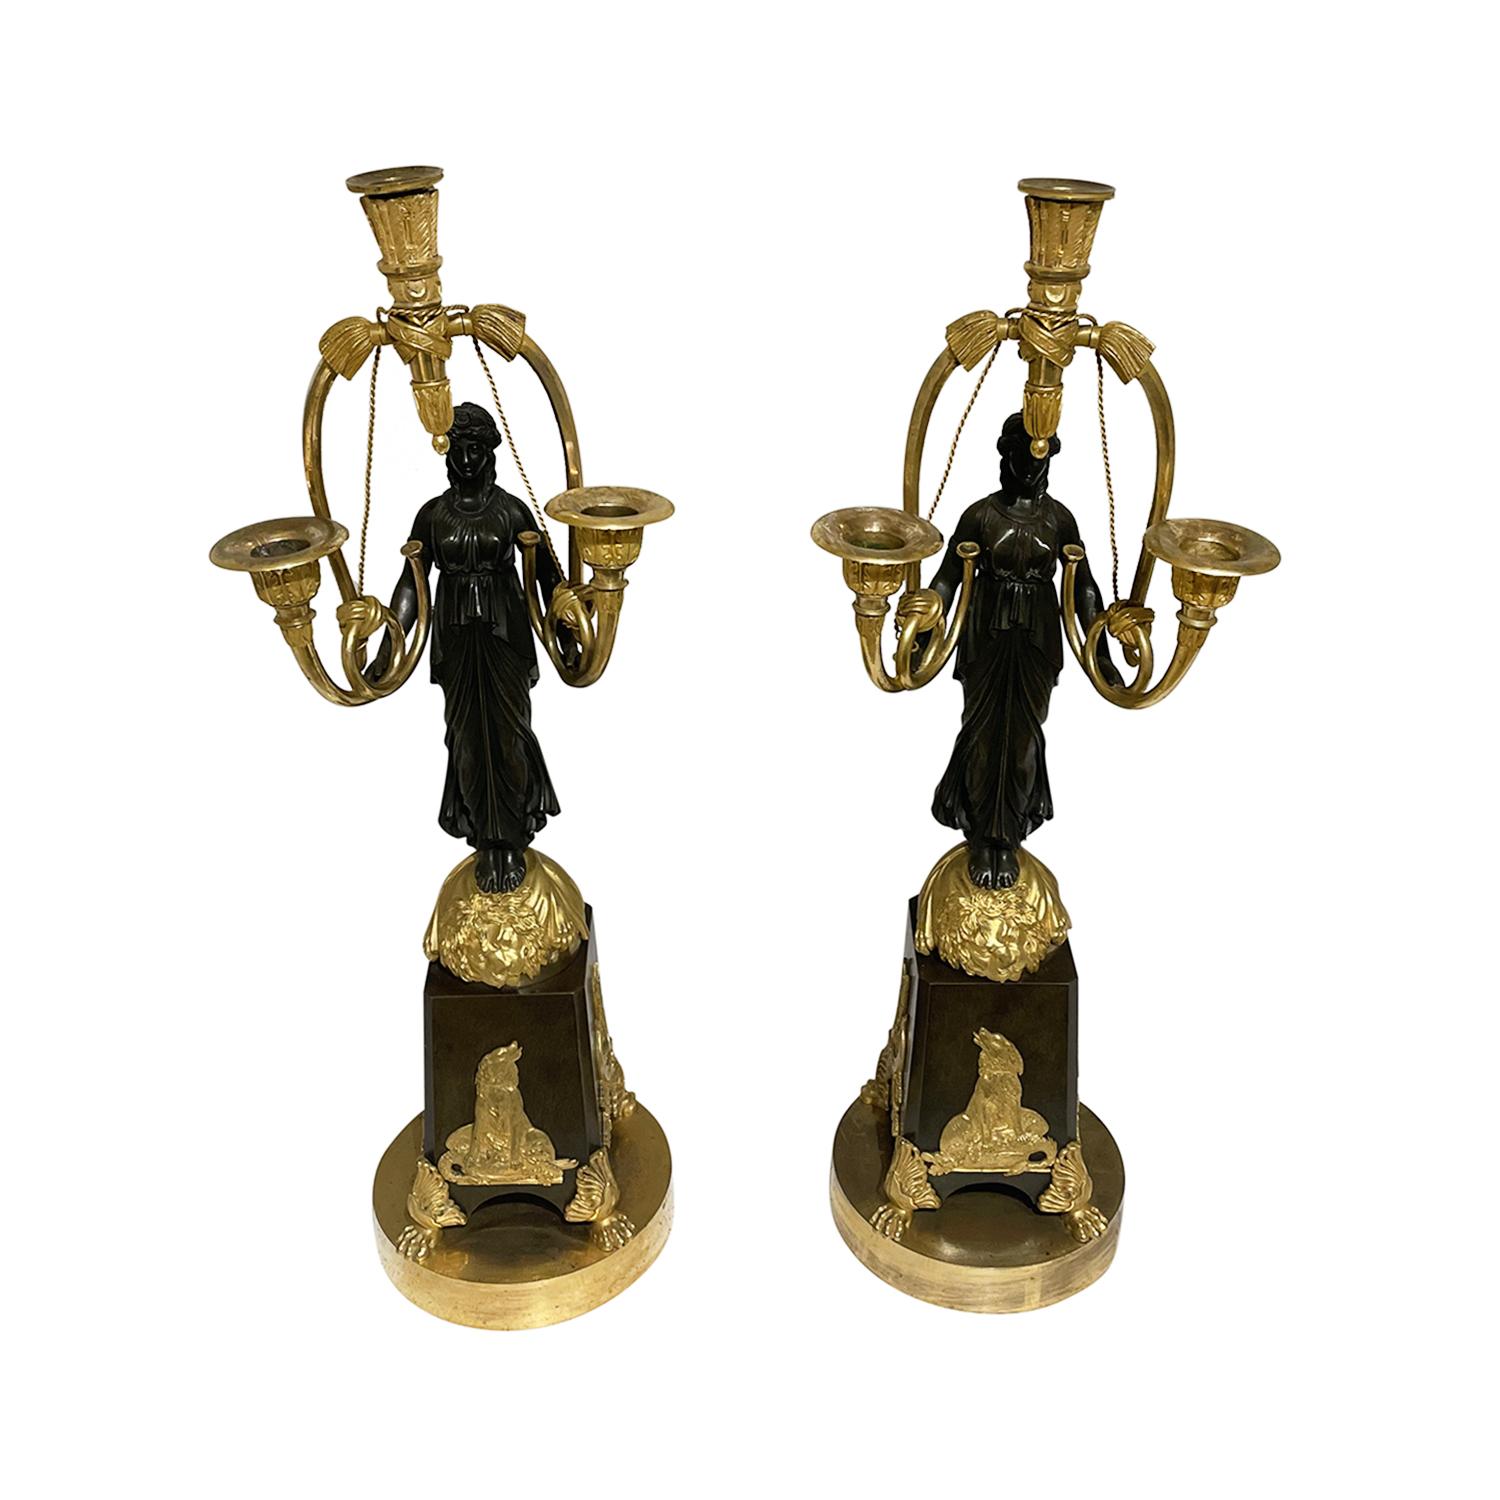 A gold-black, antique French pair of girandoles made of hand crafted gilded bronze attributed to Friedrich Bergenfeldt, in good condition. Each of the detailed Parisian candle holders are composed with a female warrior, particularized with hunting